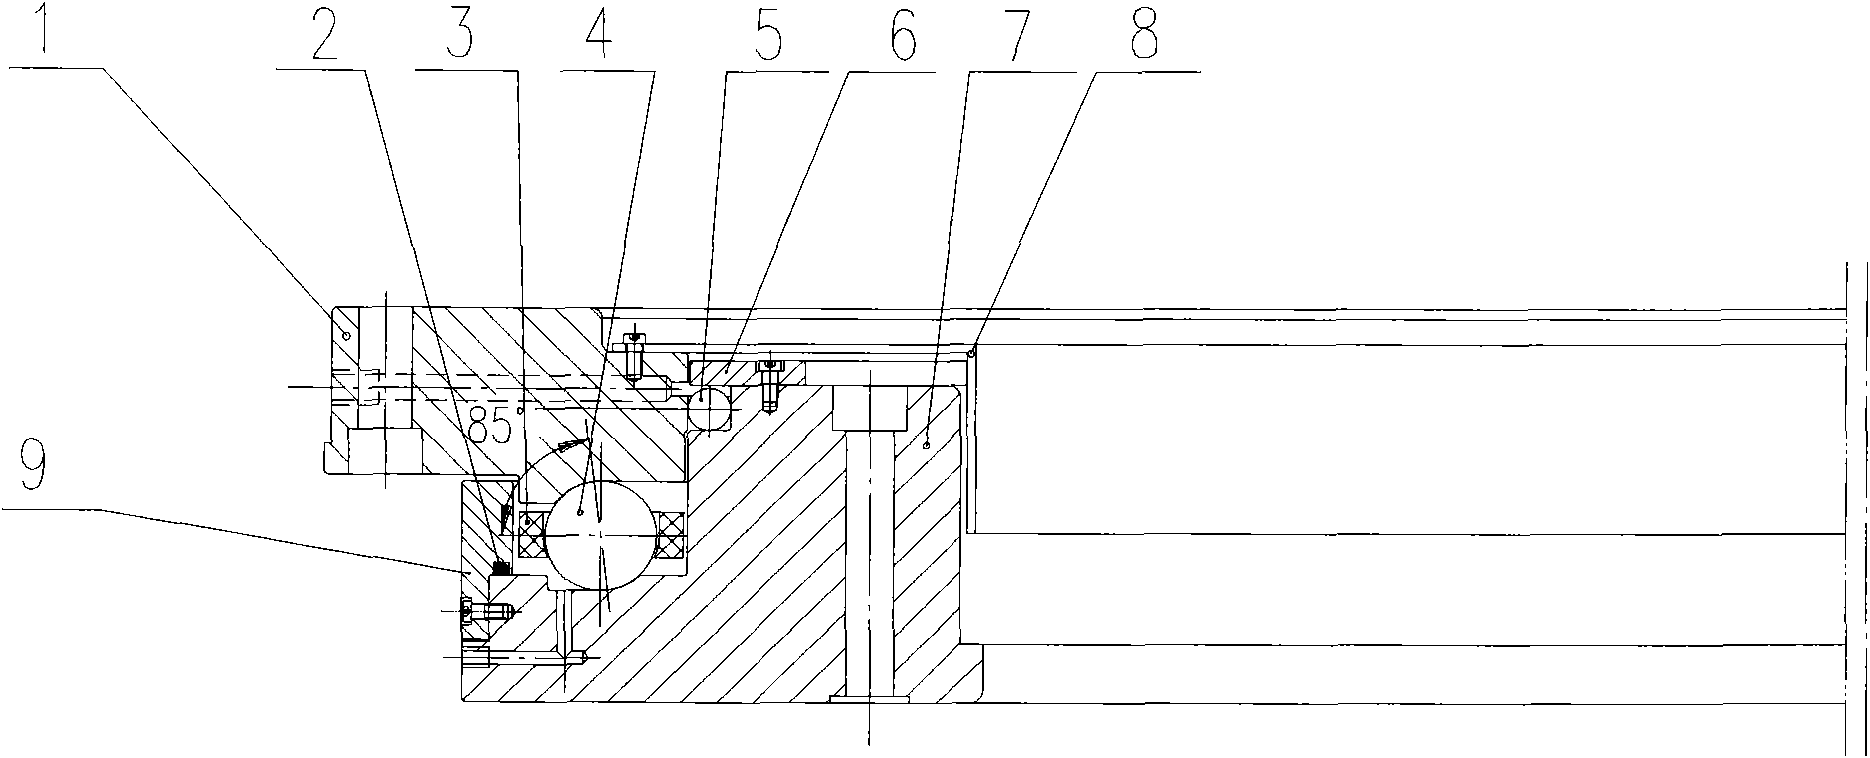 Turntable bearing for large-size celestial observation device